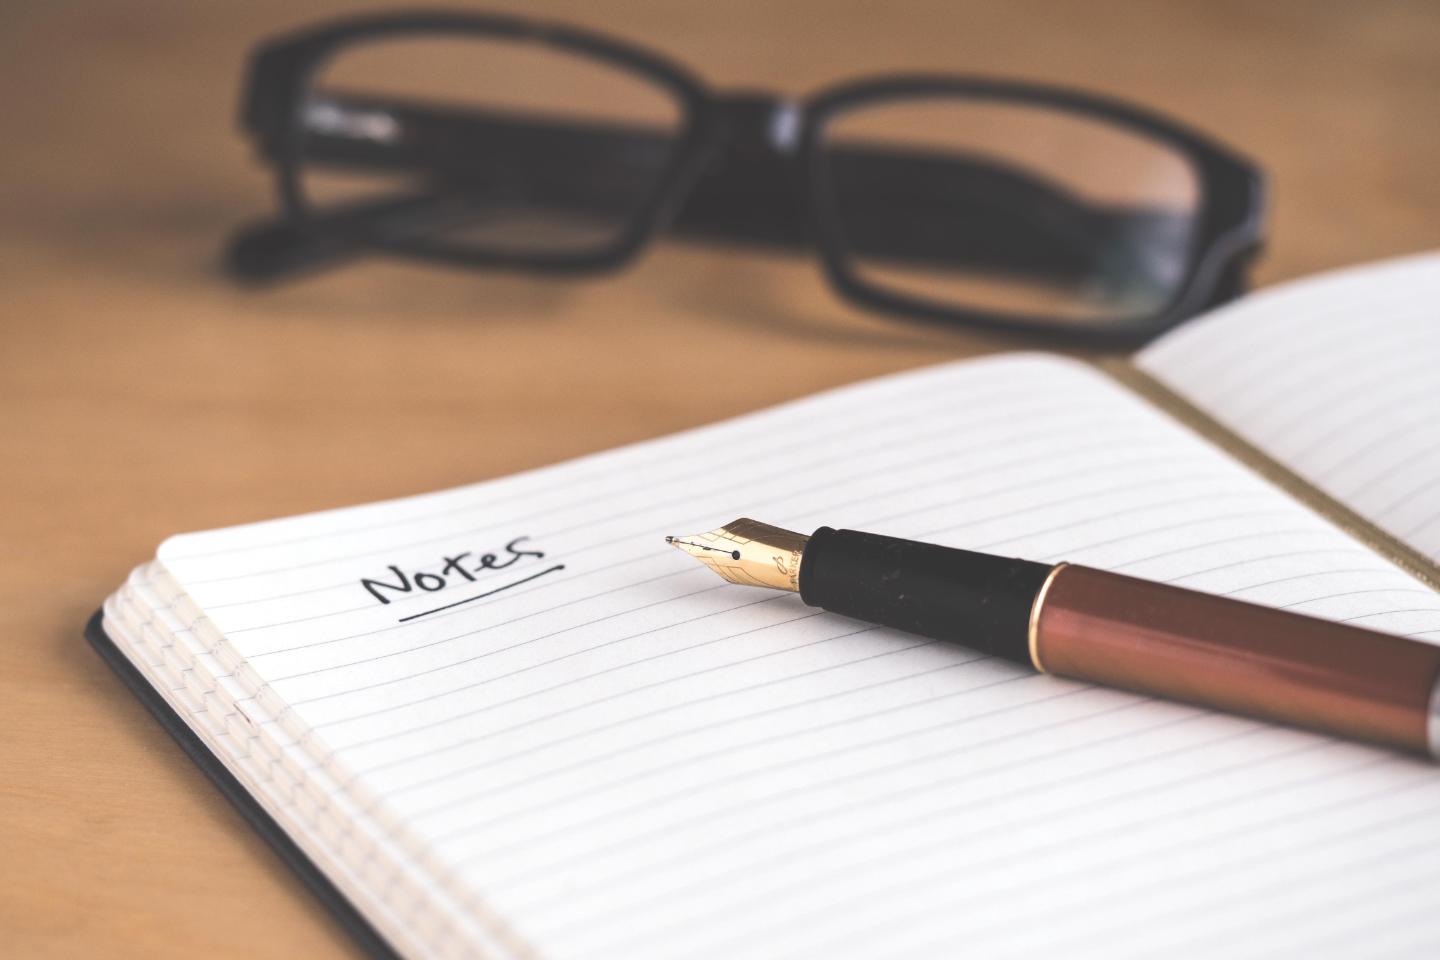 A fountain pen on an open notebook with glasses in the background